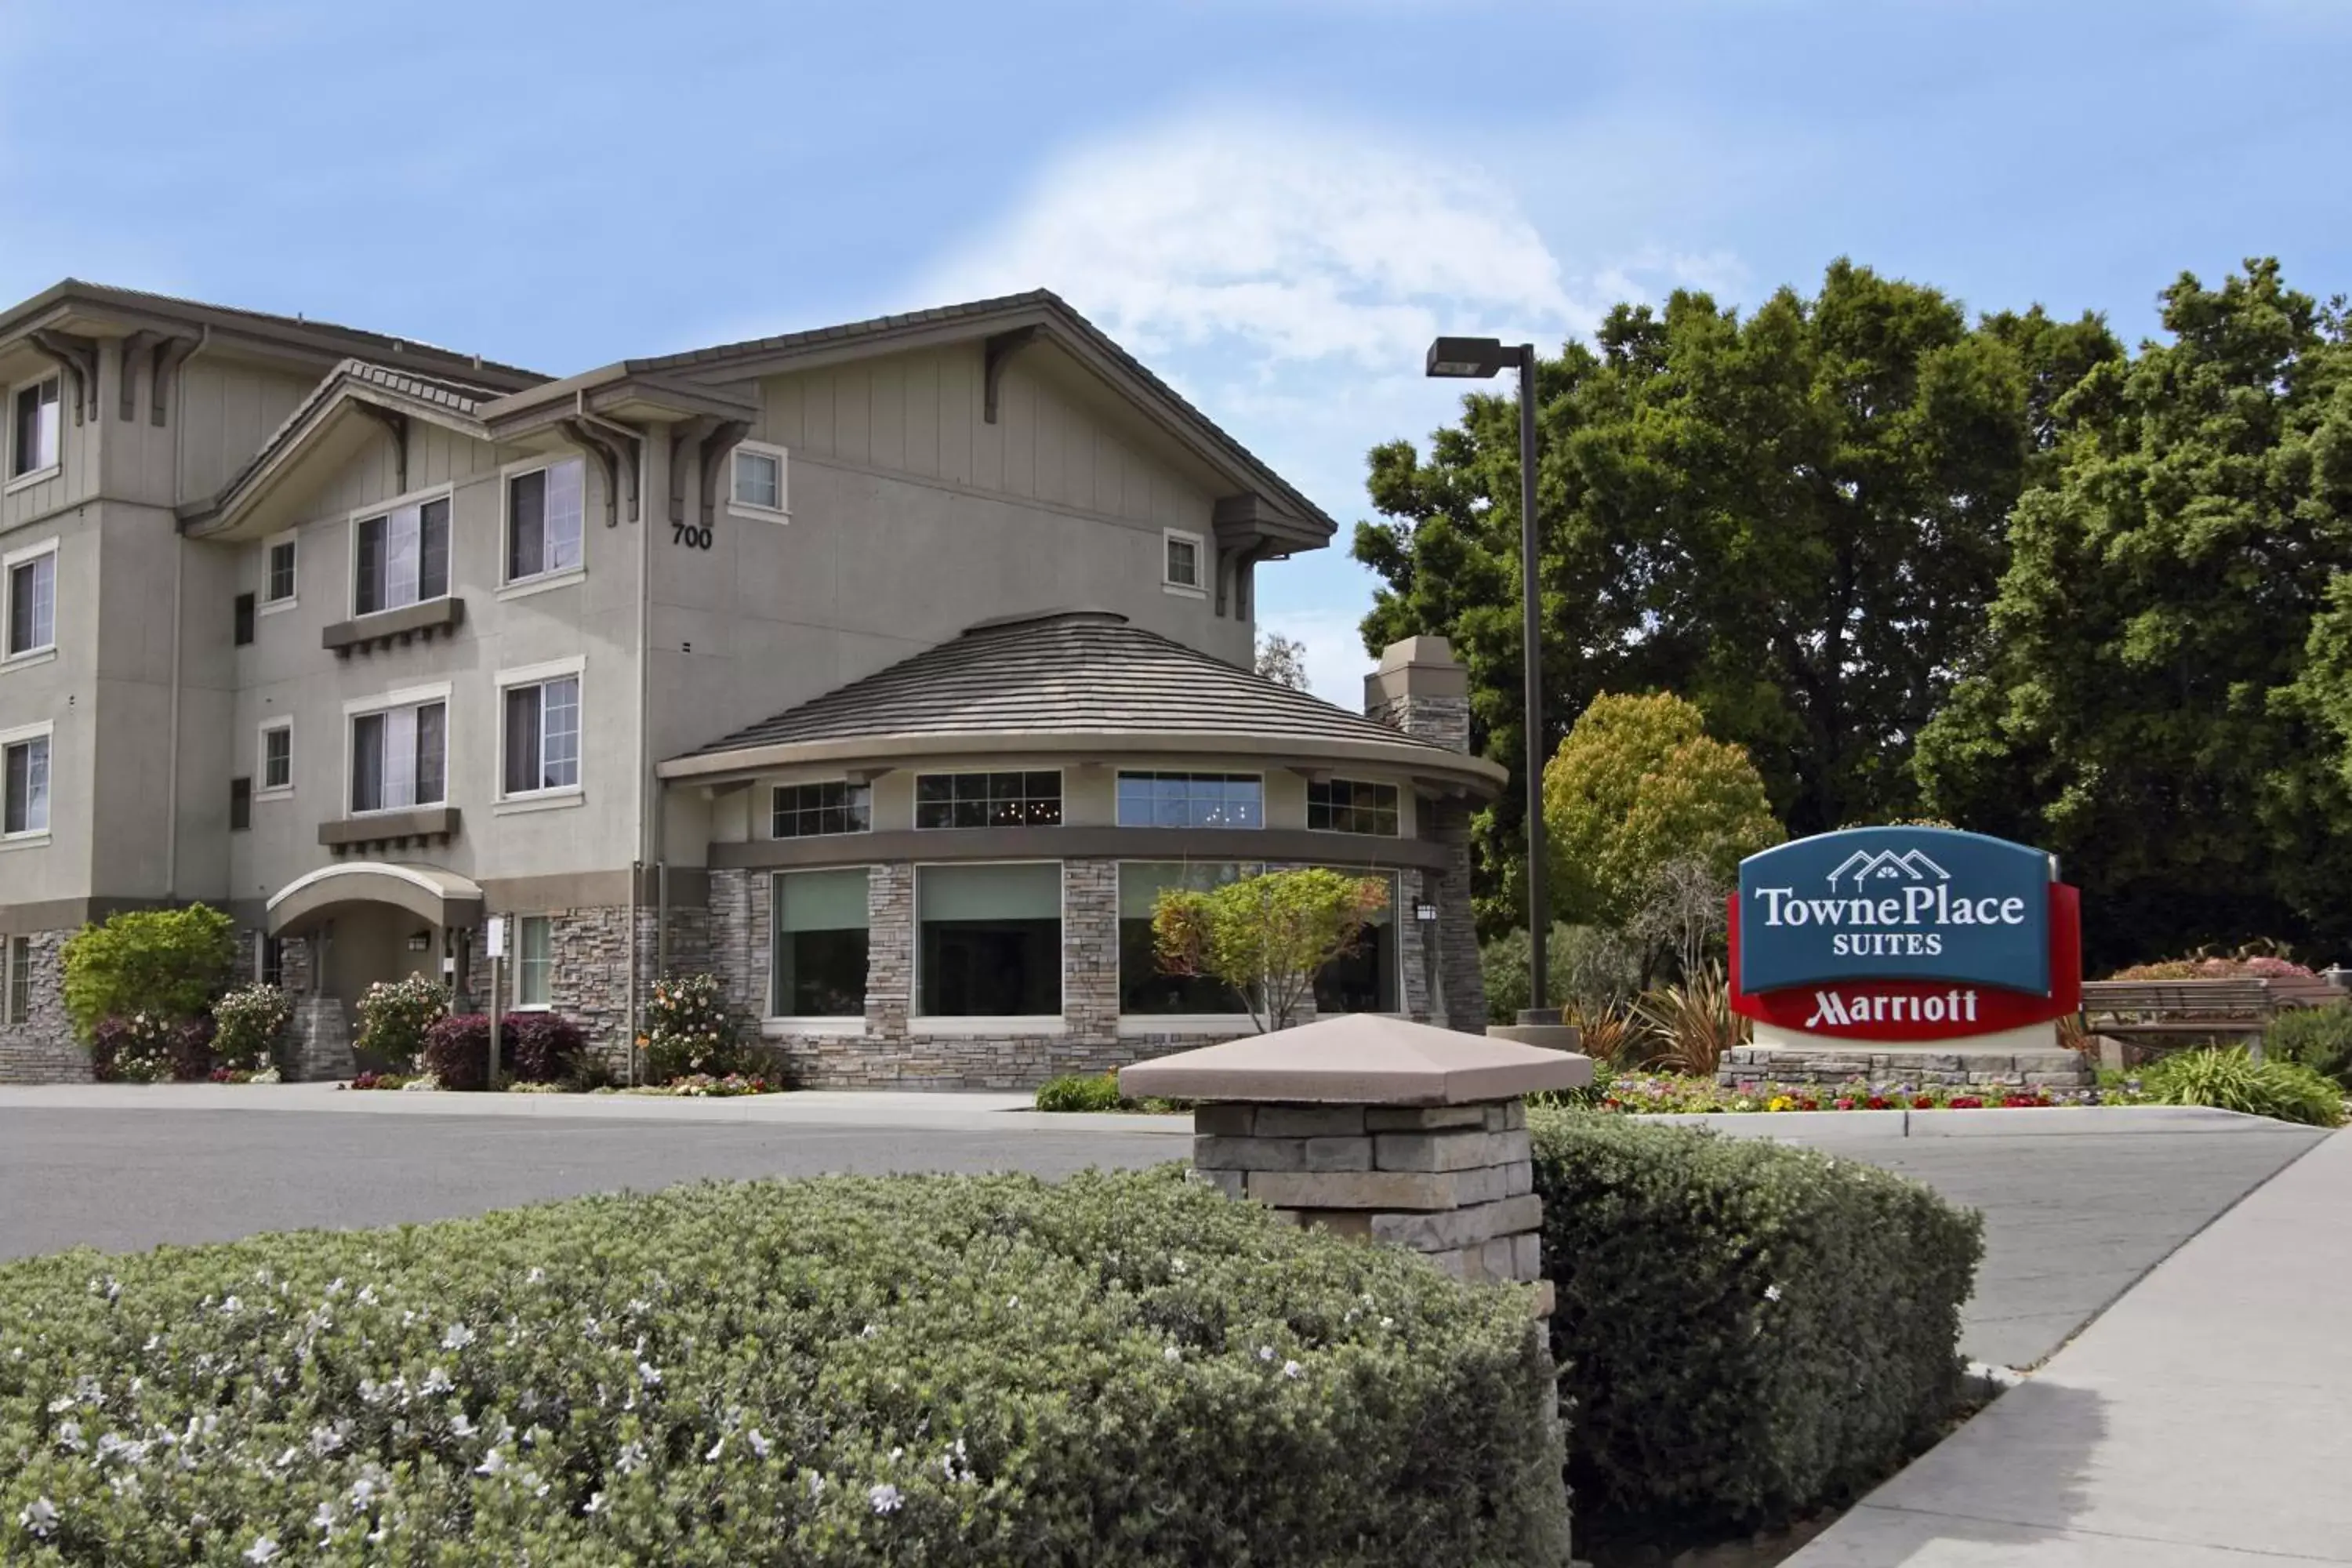 Property Building in TownePlace Suites San Jose Campbell